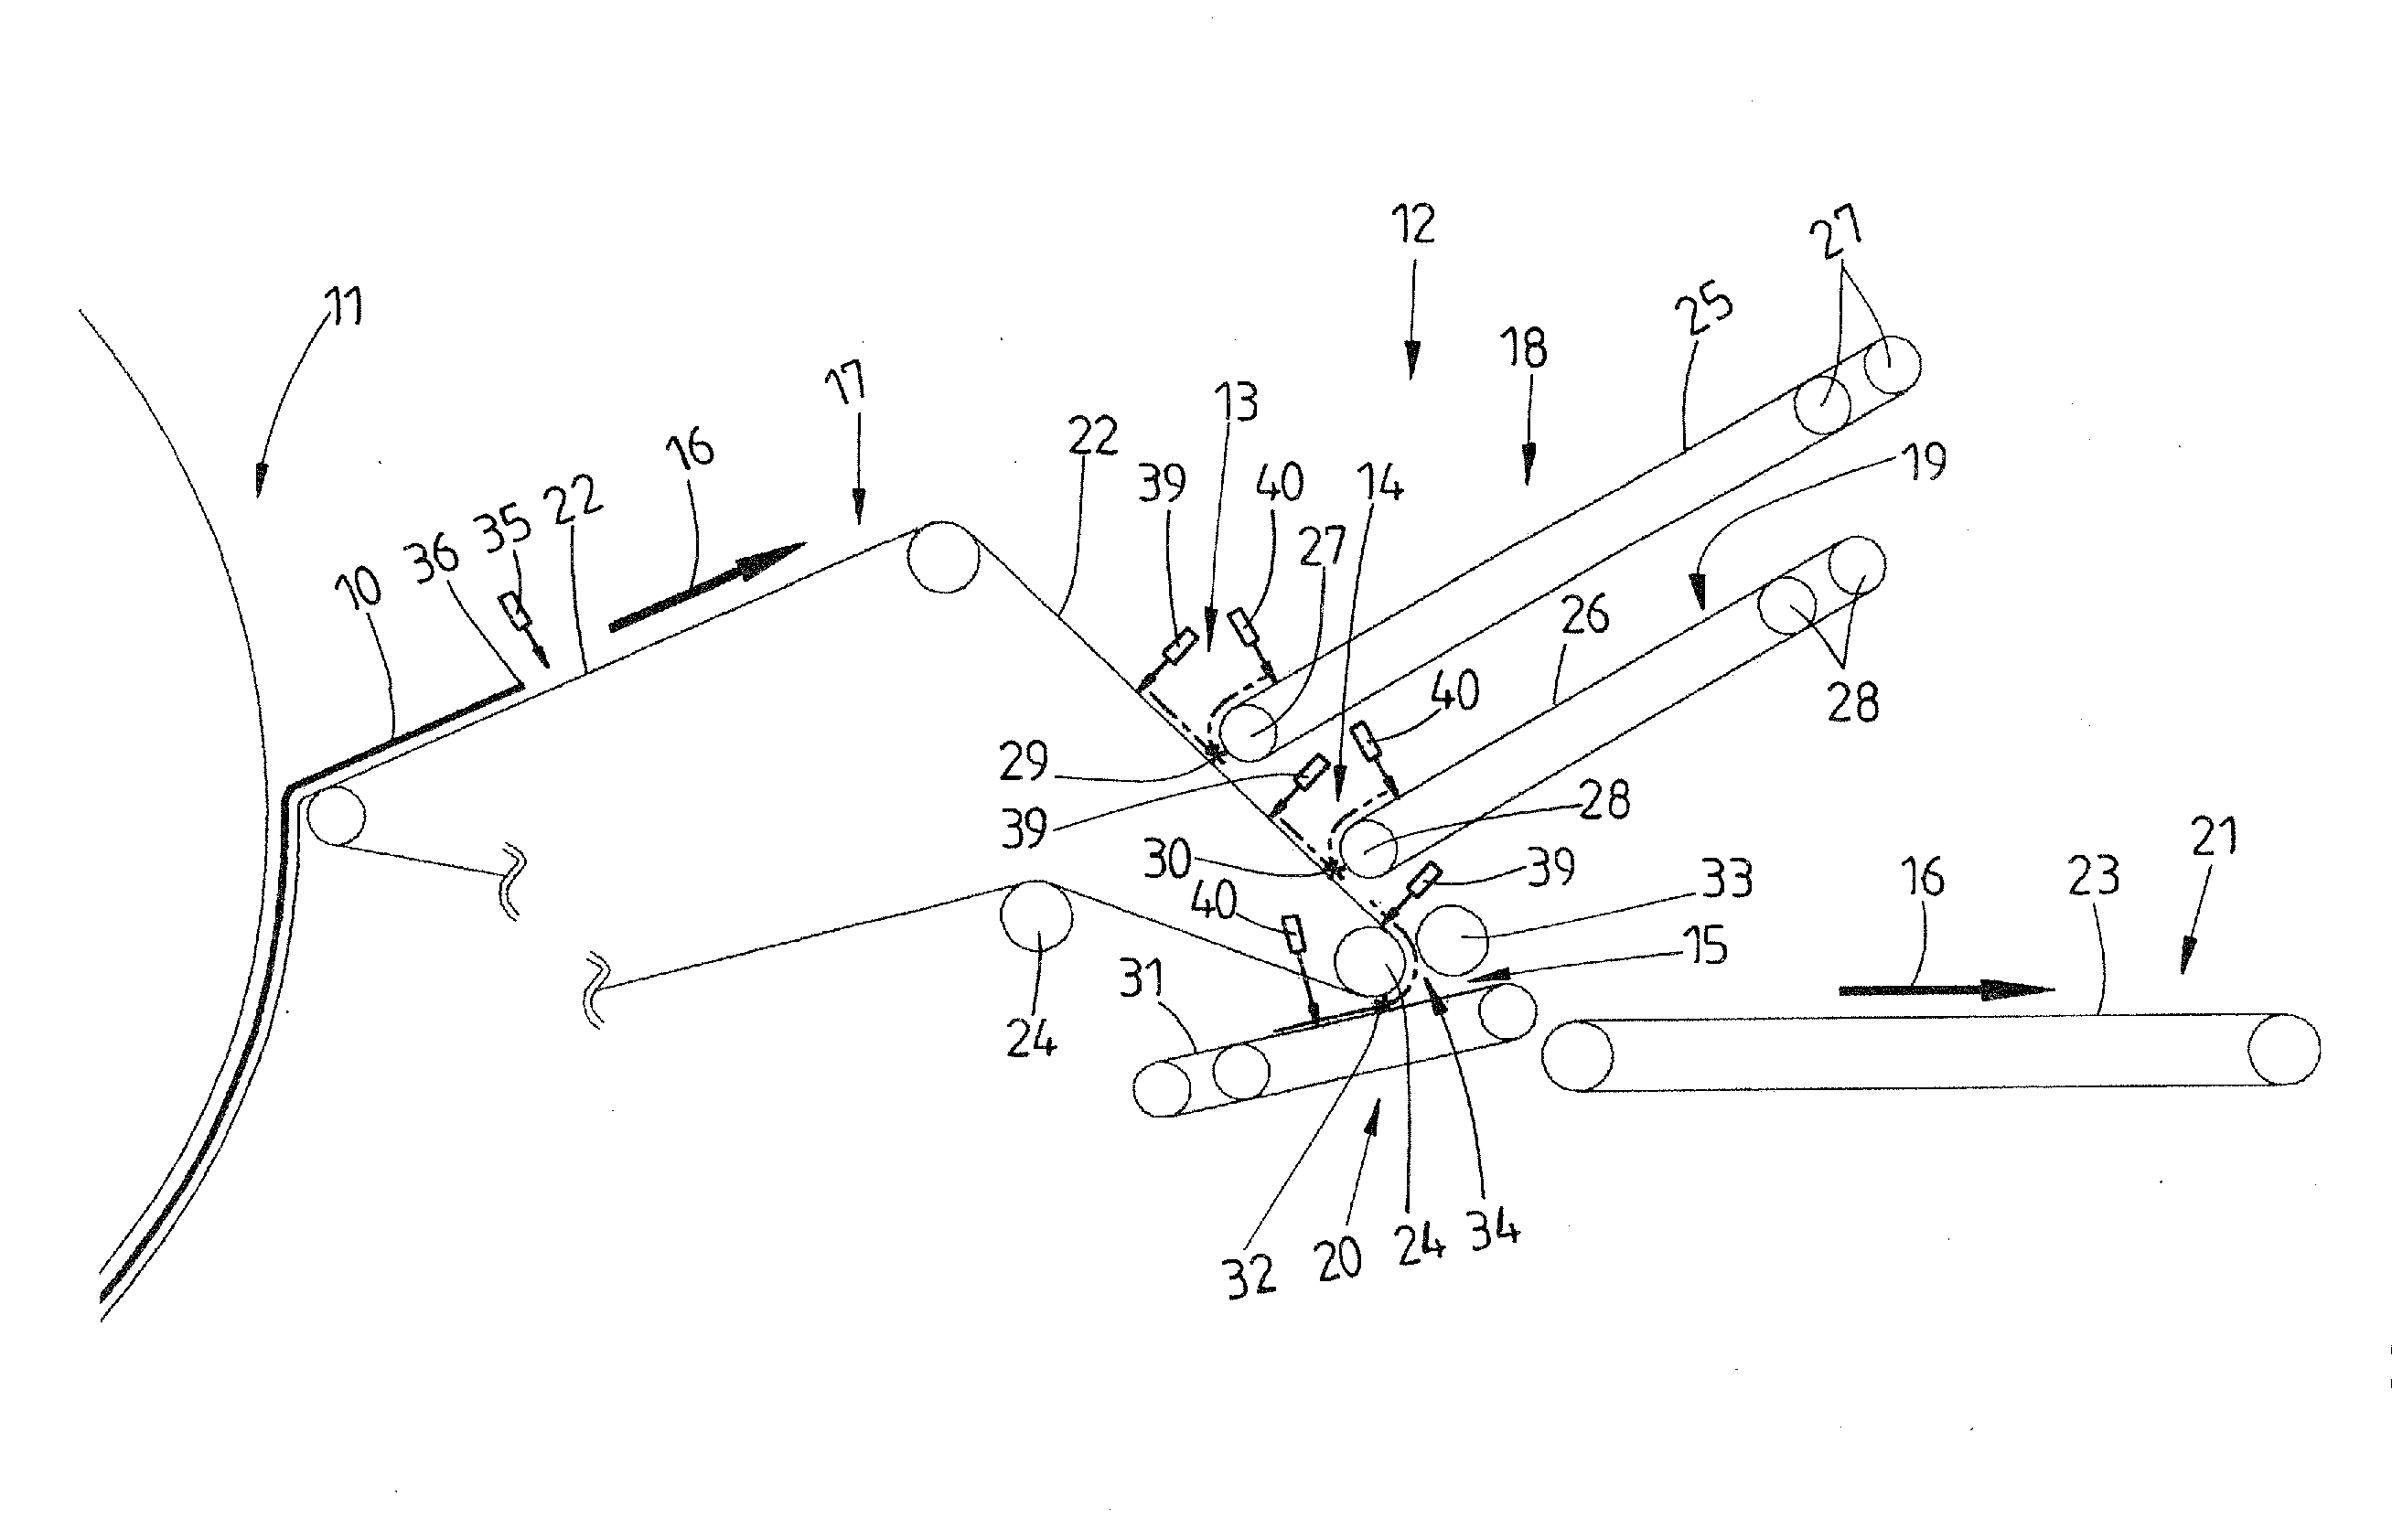 Method of, and apparatus for, folding items of laundry